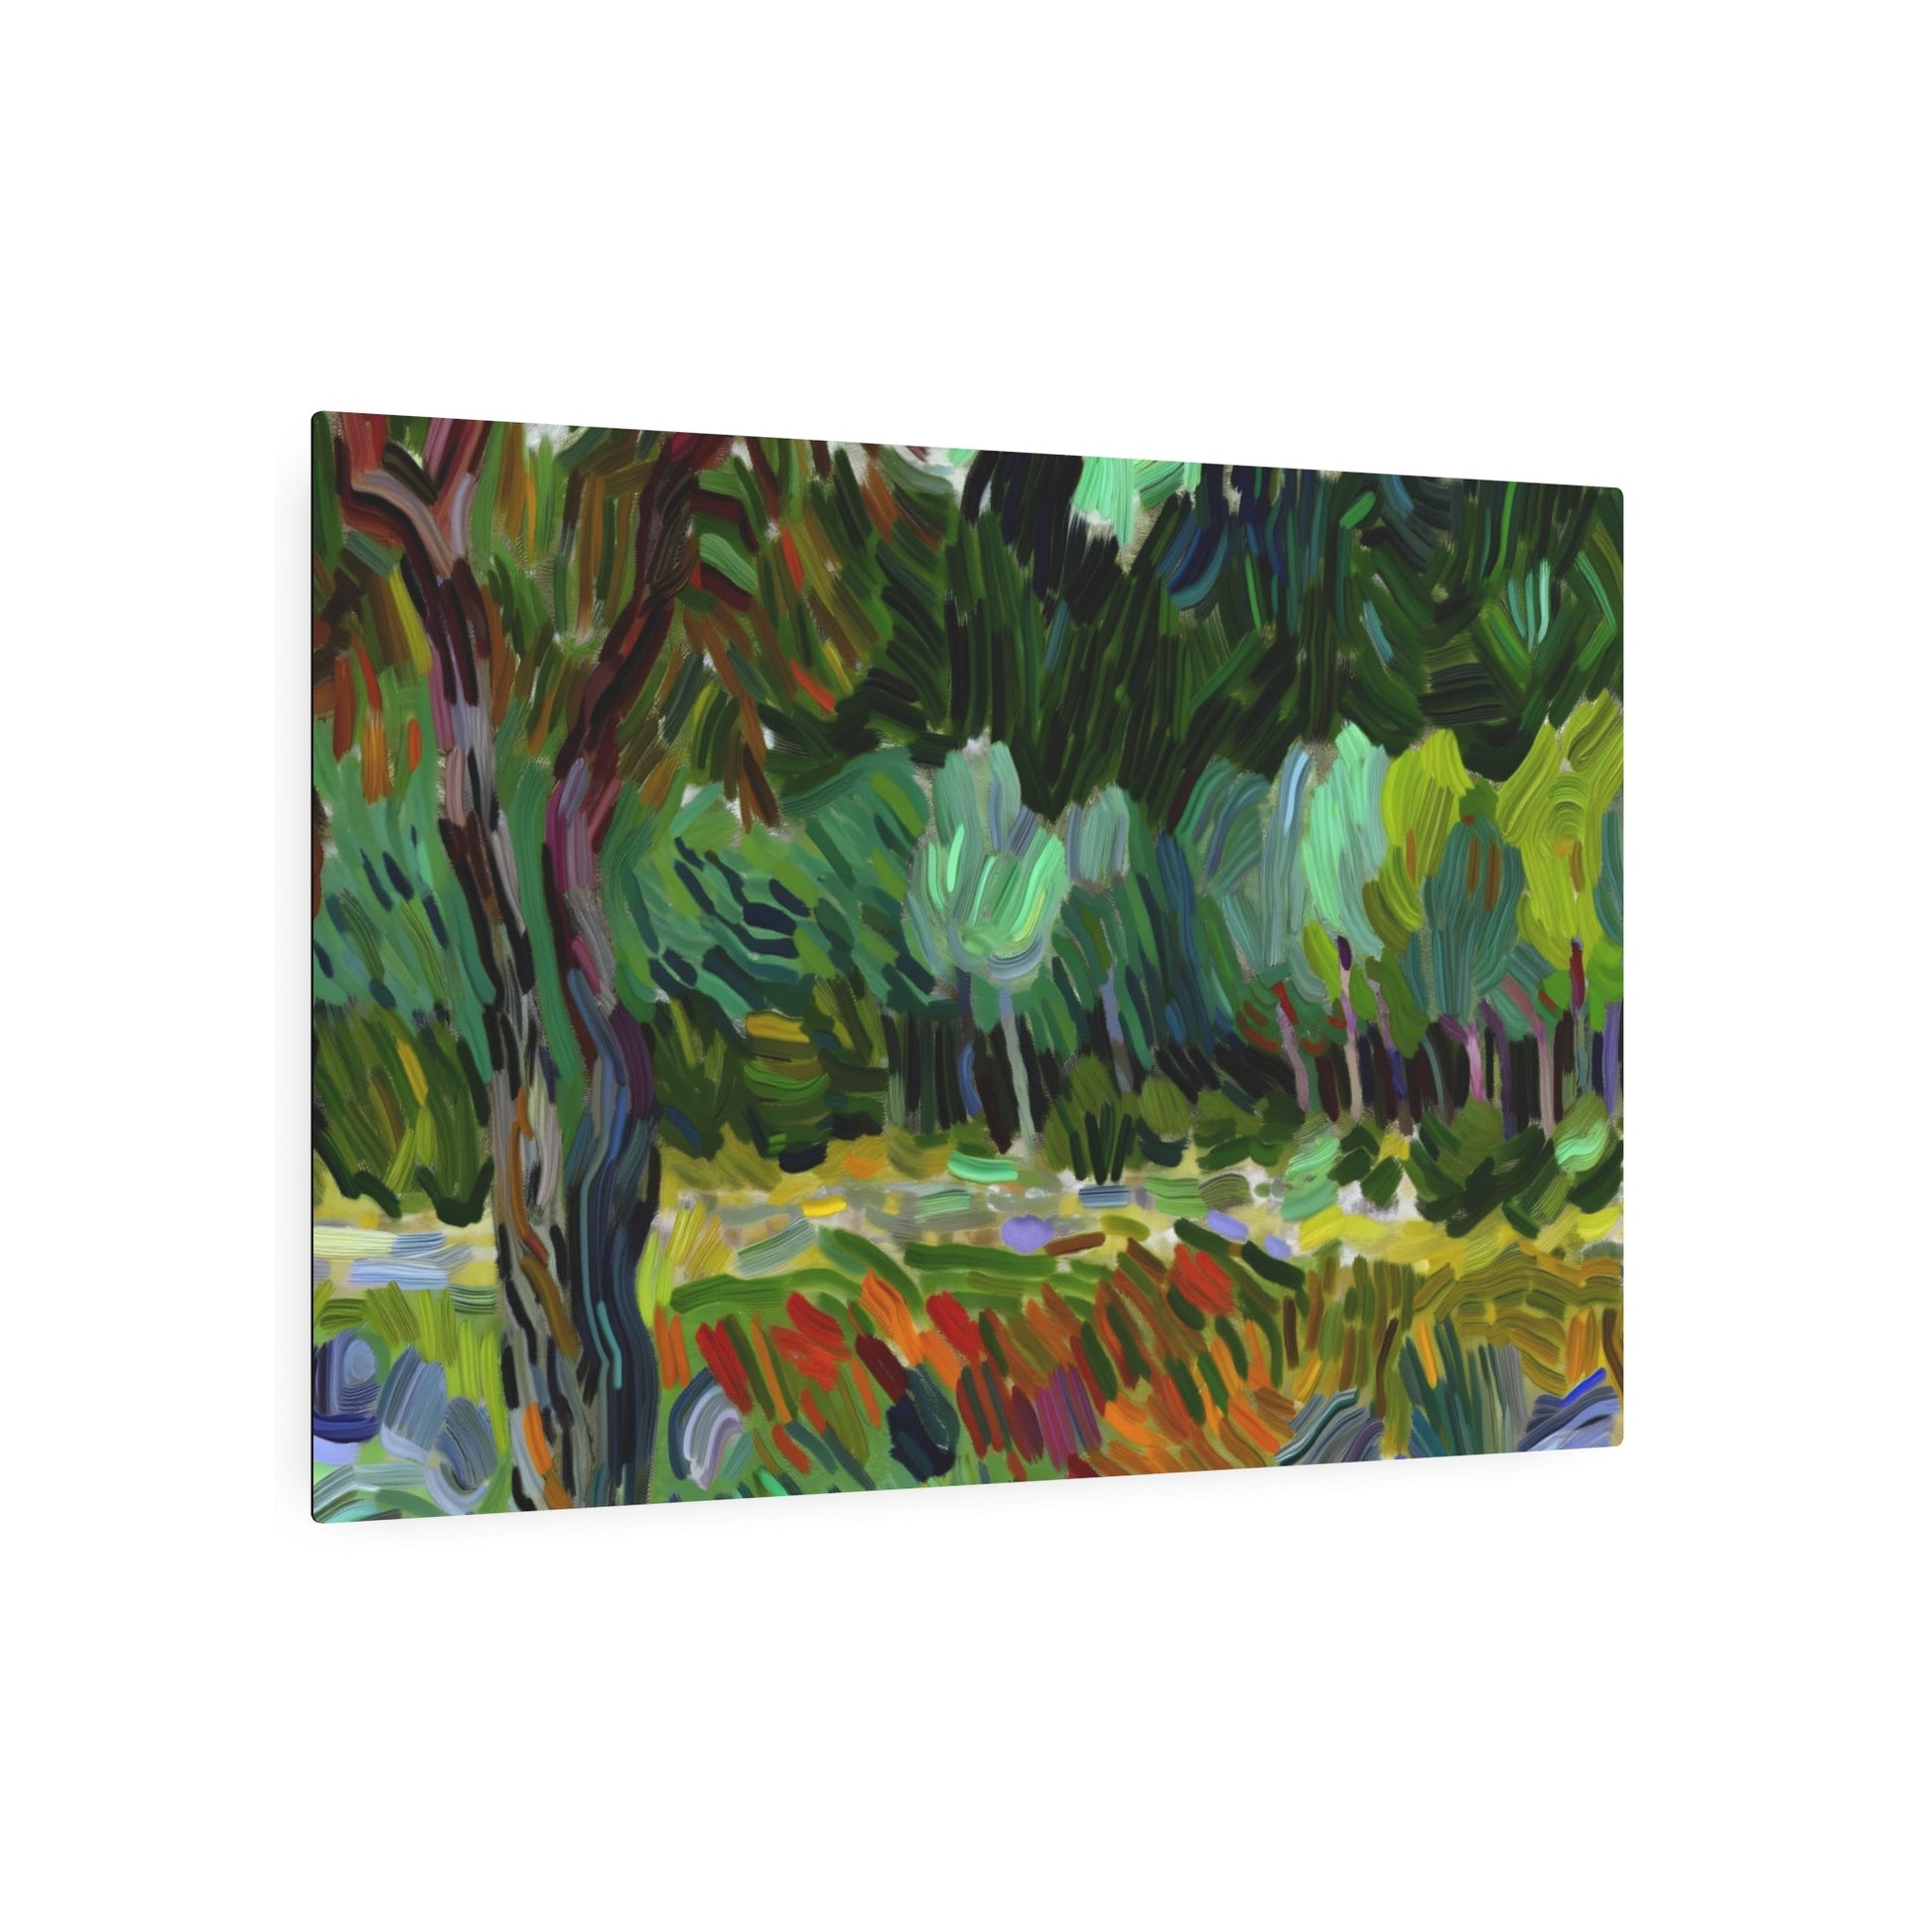 Metal Poster Art | "Post-Impressionist Style Painting of Forests and Trees - Western Art Styles Collection" - Metal Poster Art 36″ x 24″ (Horizontal) 0.12''